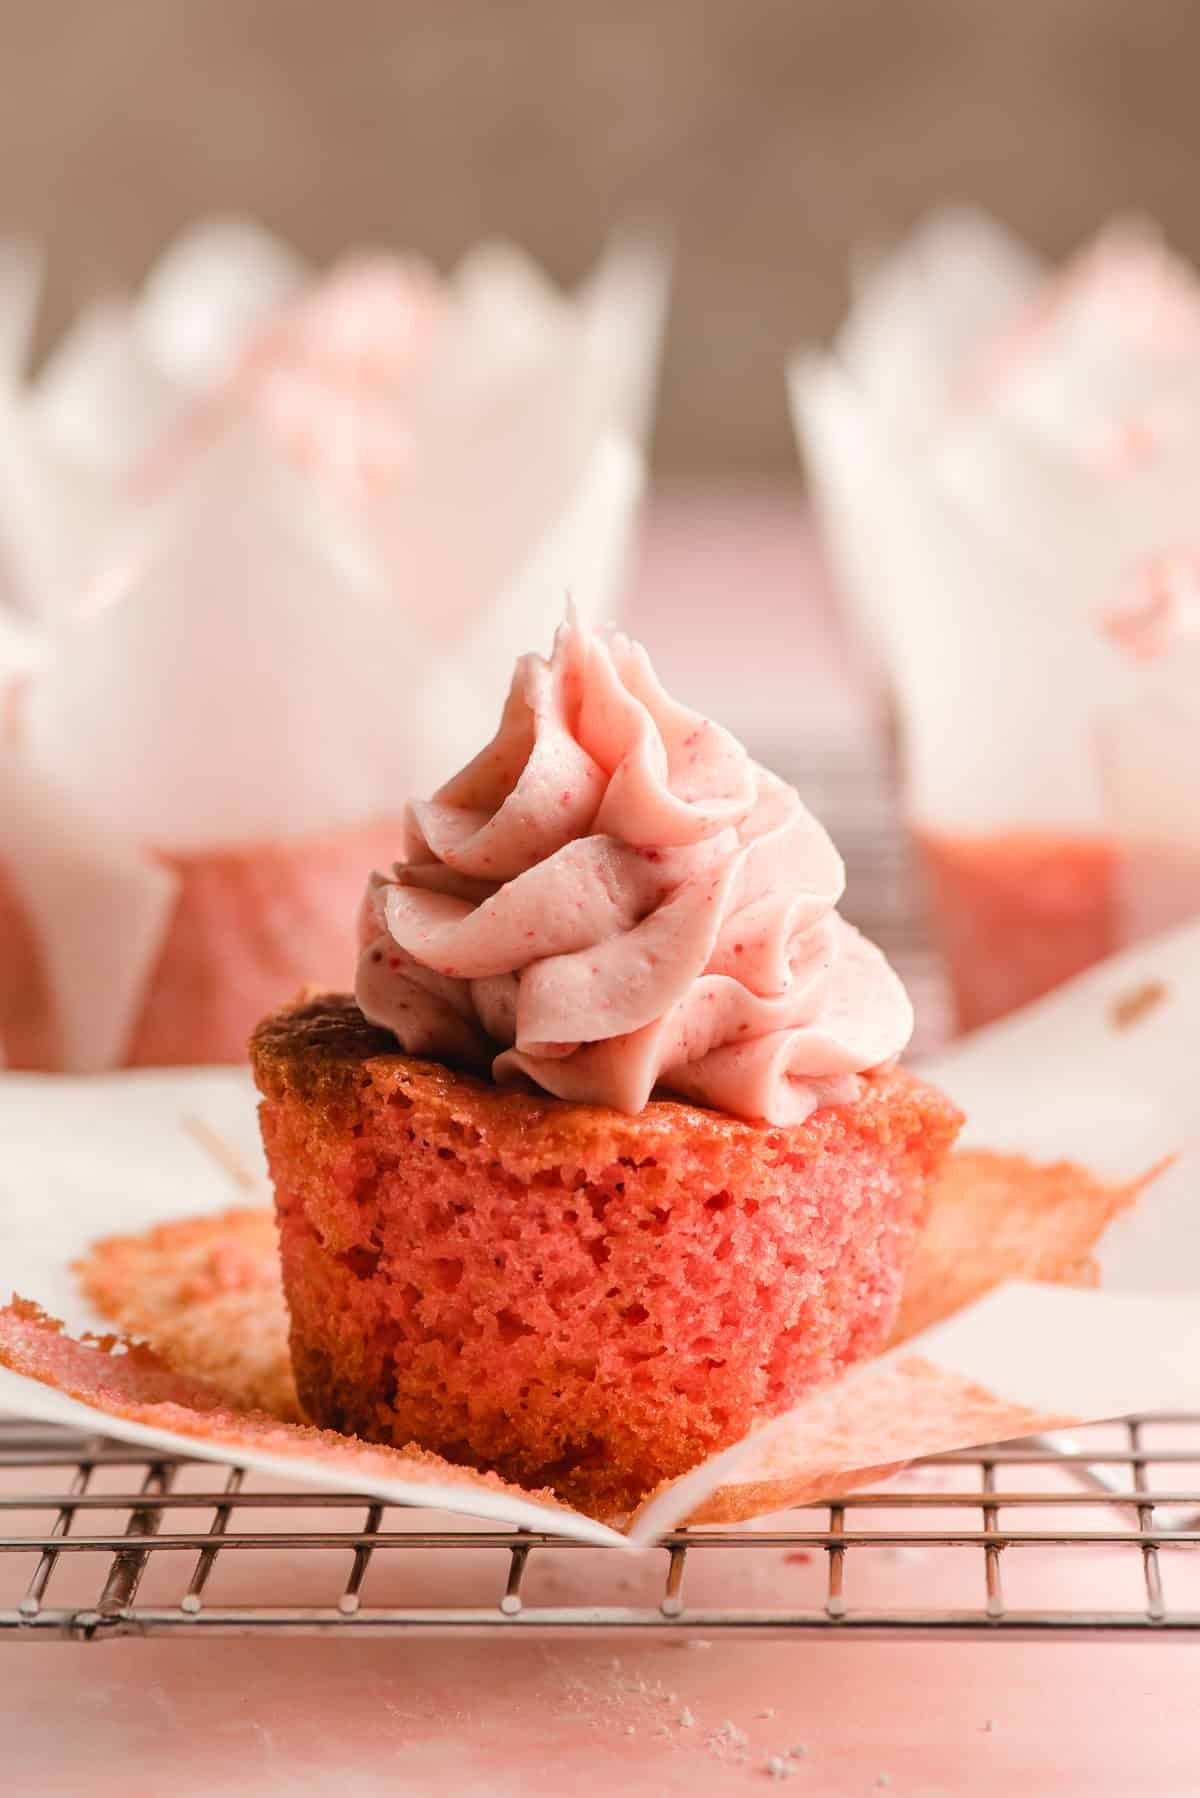 Strawberry cupcake with a parchment paper liner peeled off around it.